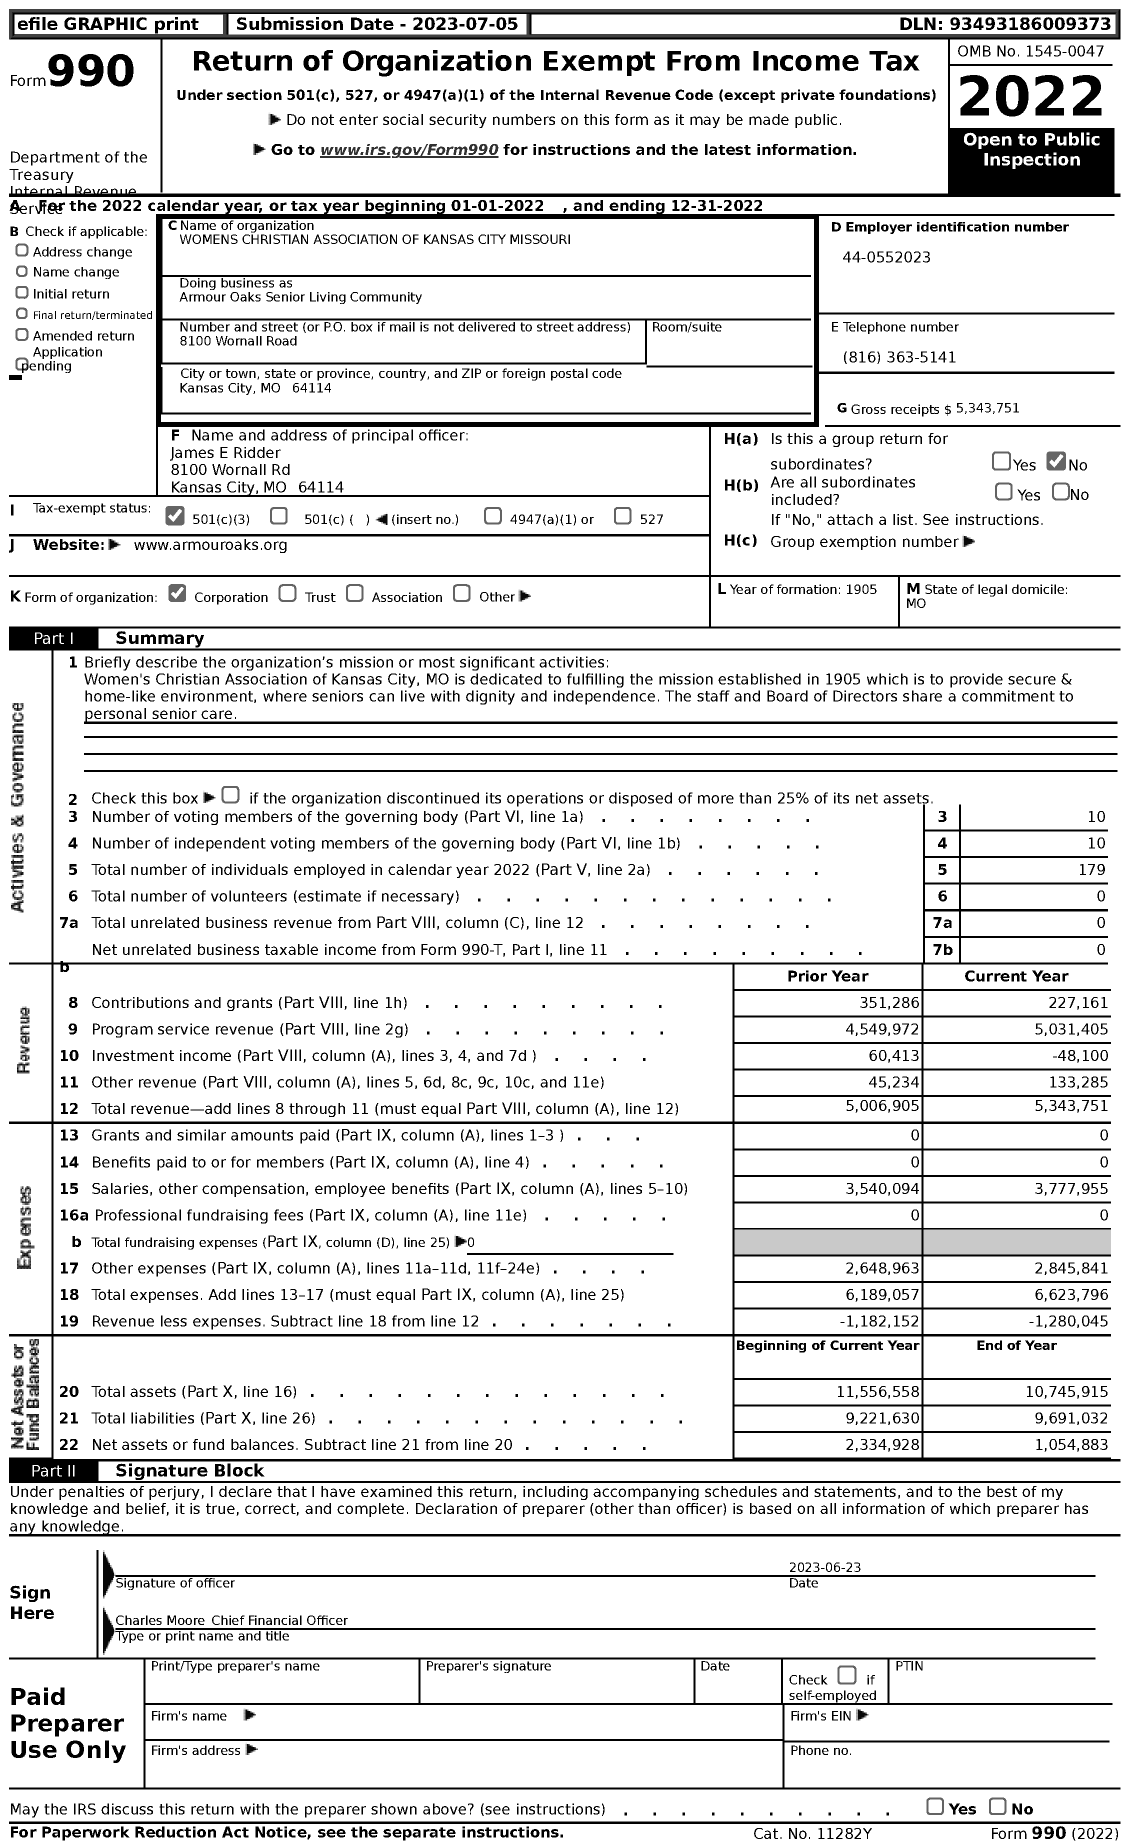 Image of first page of 2022 Form 990 for Armour Oaks Senior Living Community